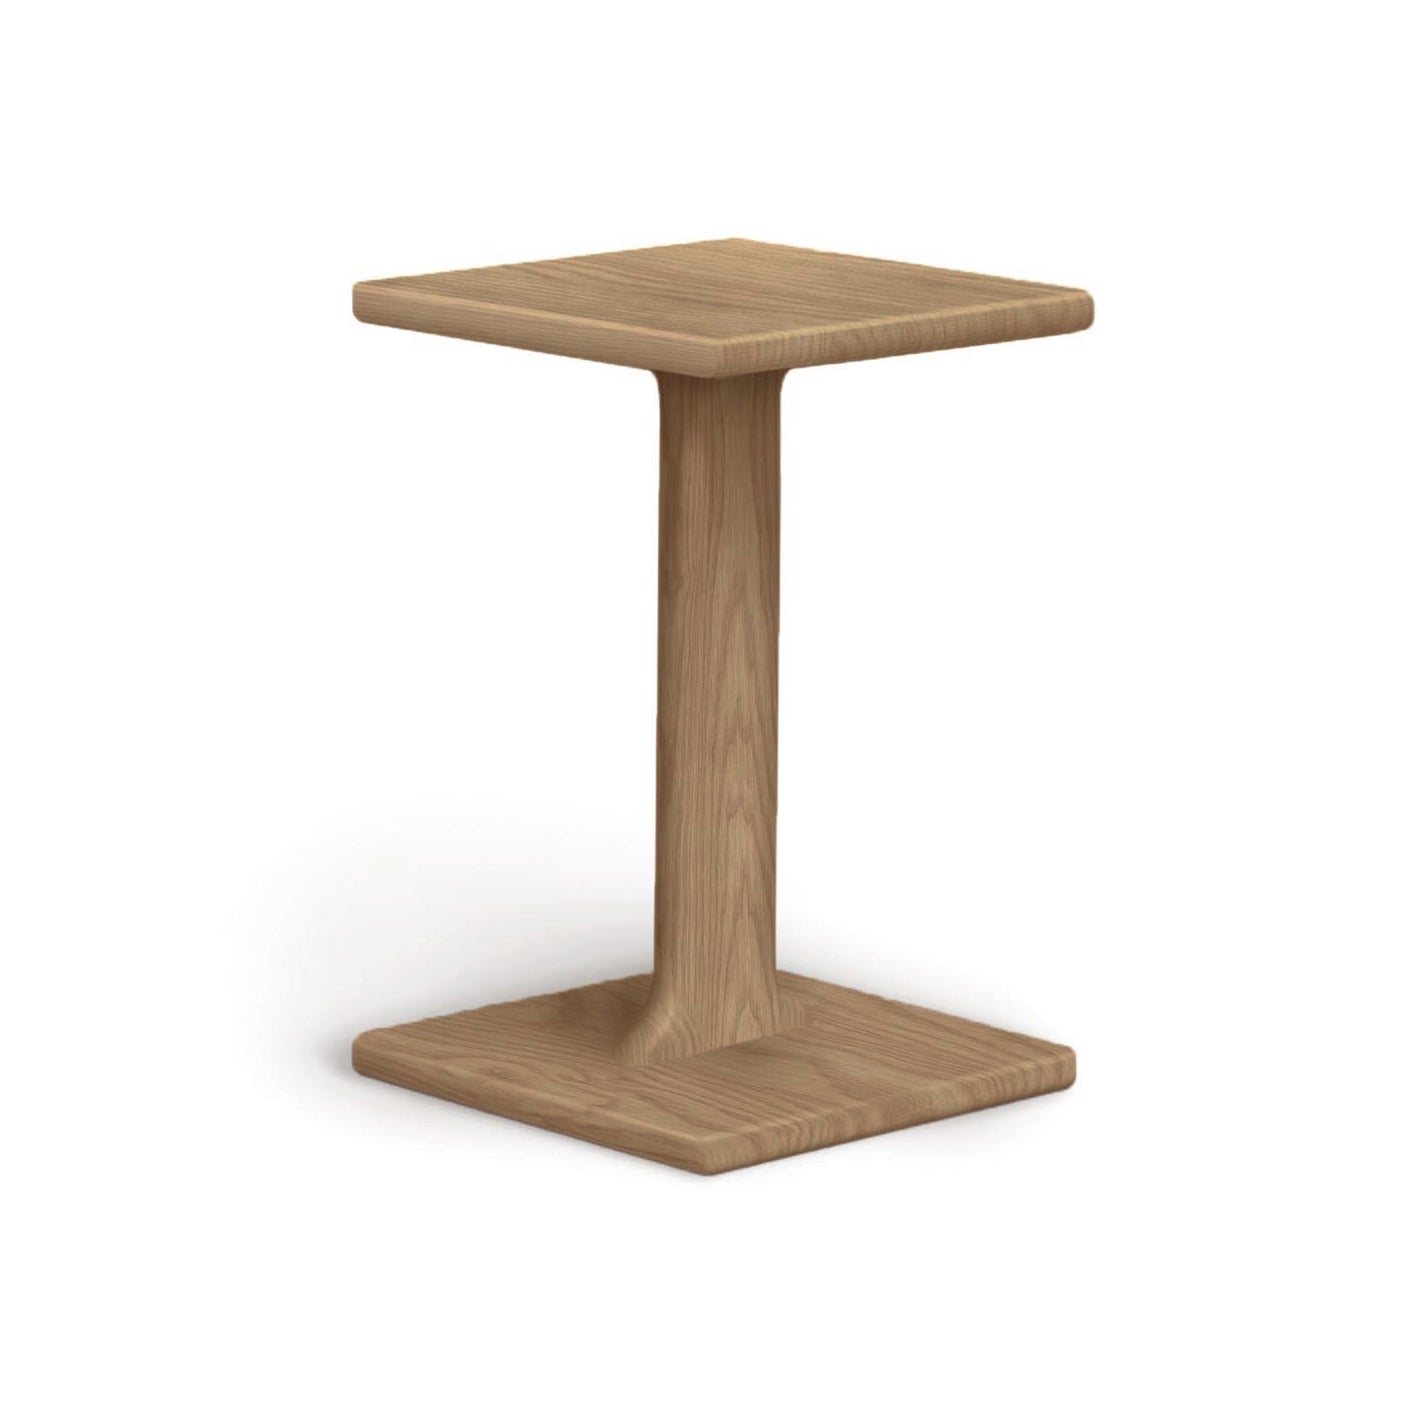 A Copeland Furniture Sierra Chair Table with a square base made of wood.